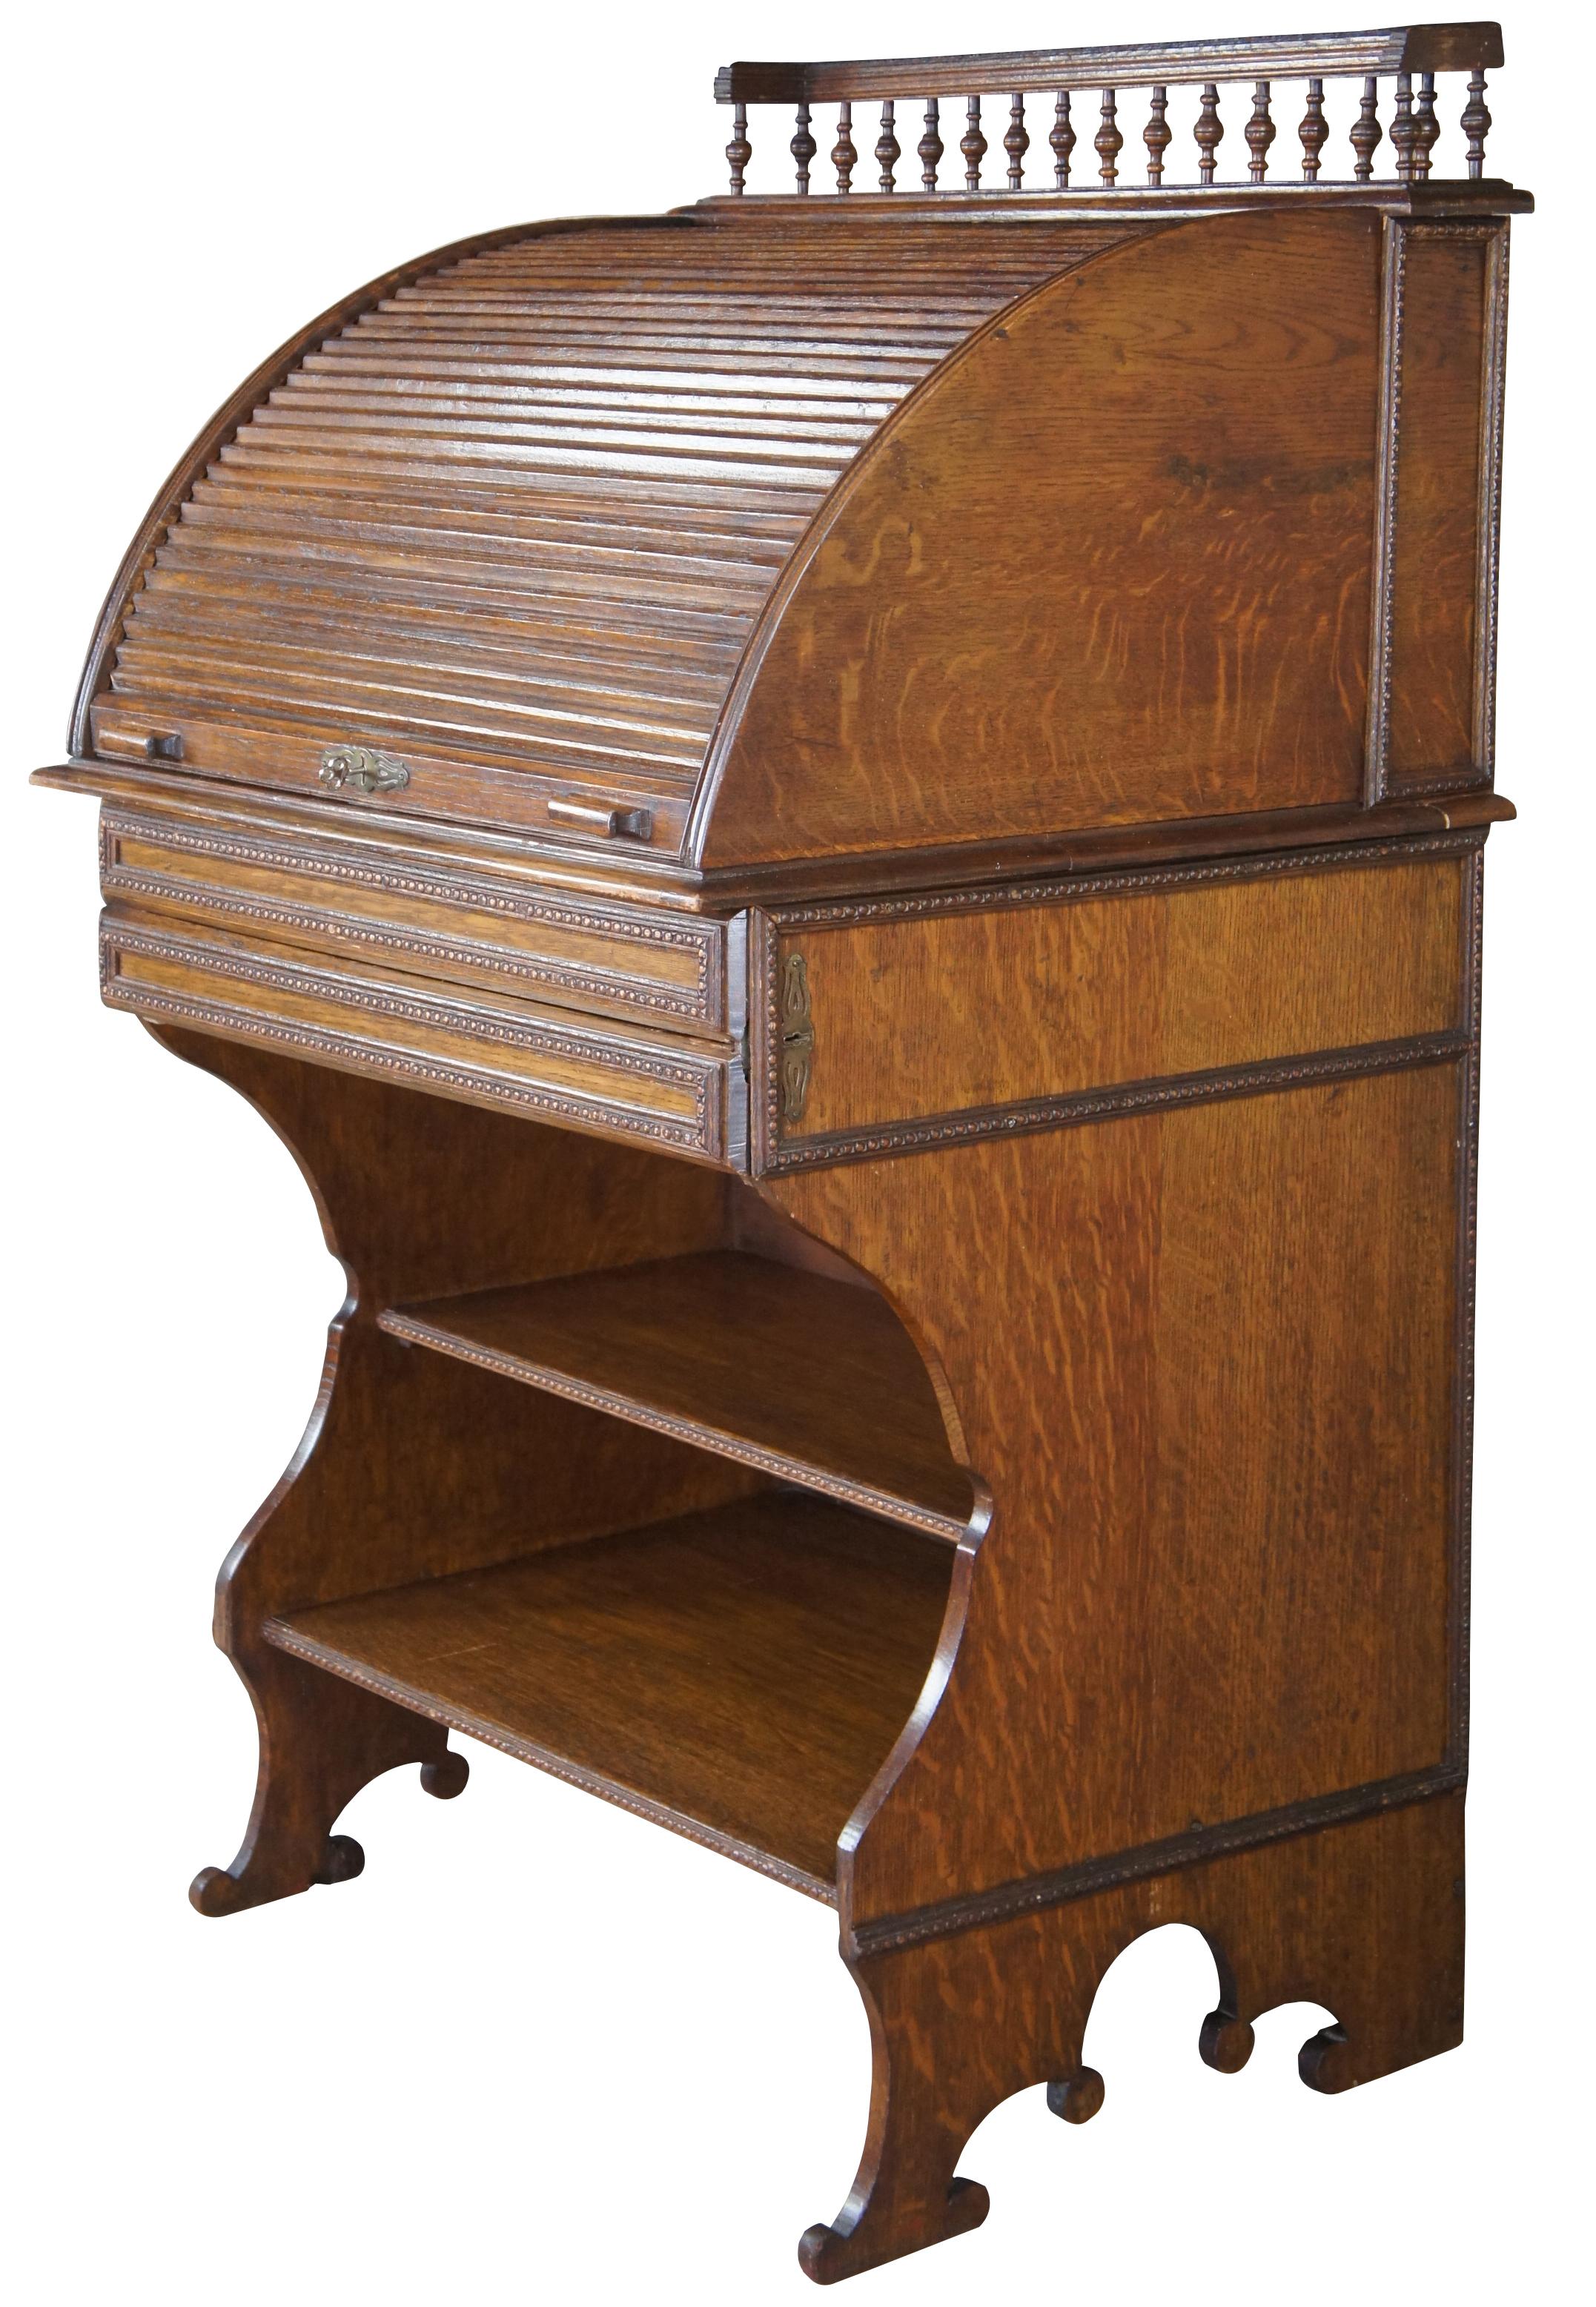 Rare antique Victorian roll top library writing desk. Made of quartersawn oak featuring a tambour door that opens to multiple cubbies / compartments and file / letter storage with two inkwells and pen holder. Also features an upper gallery with